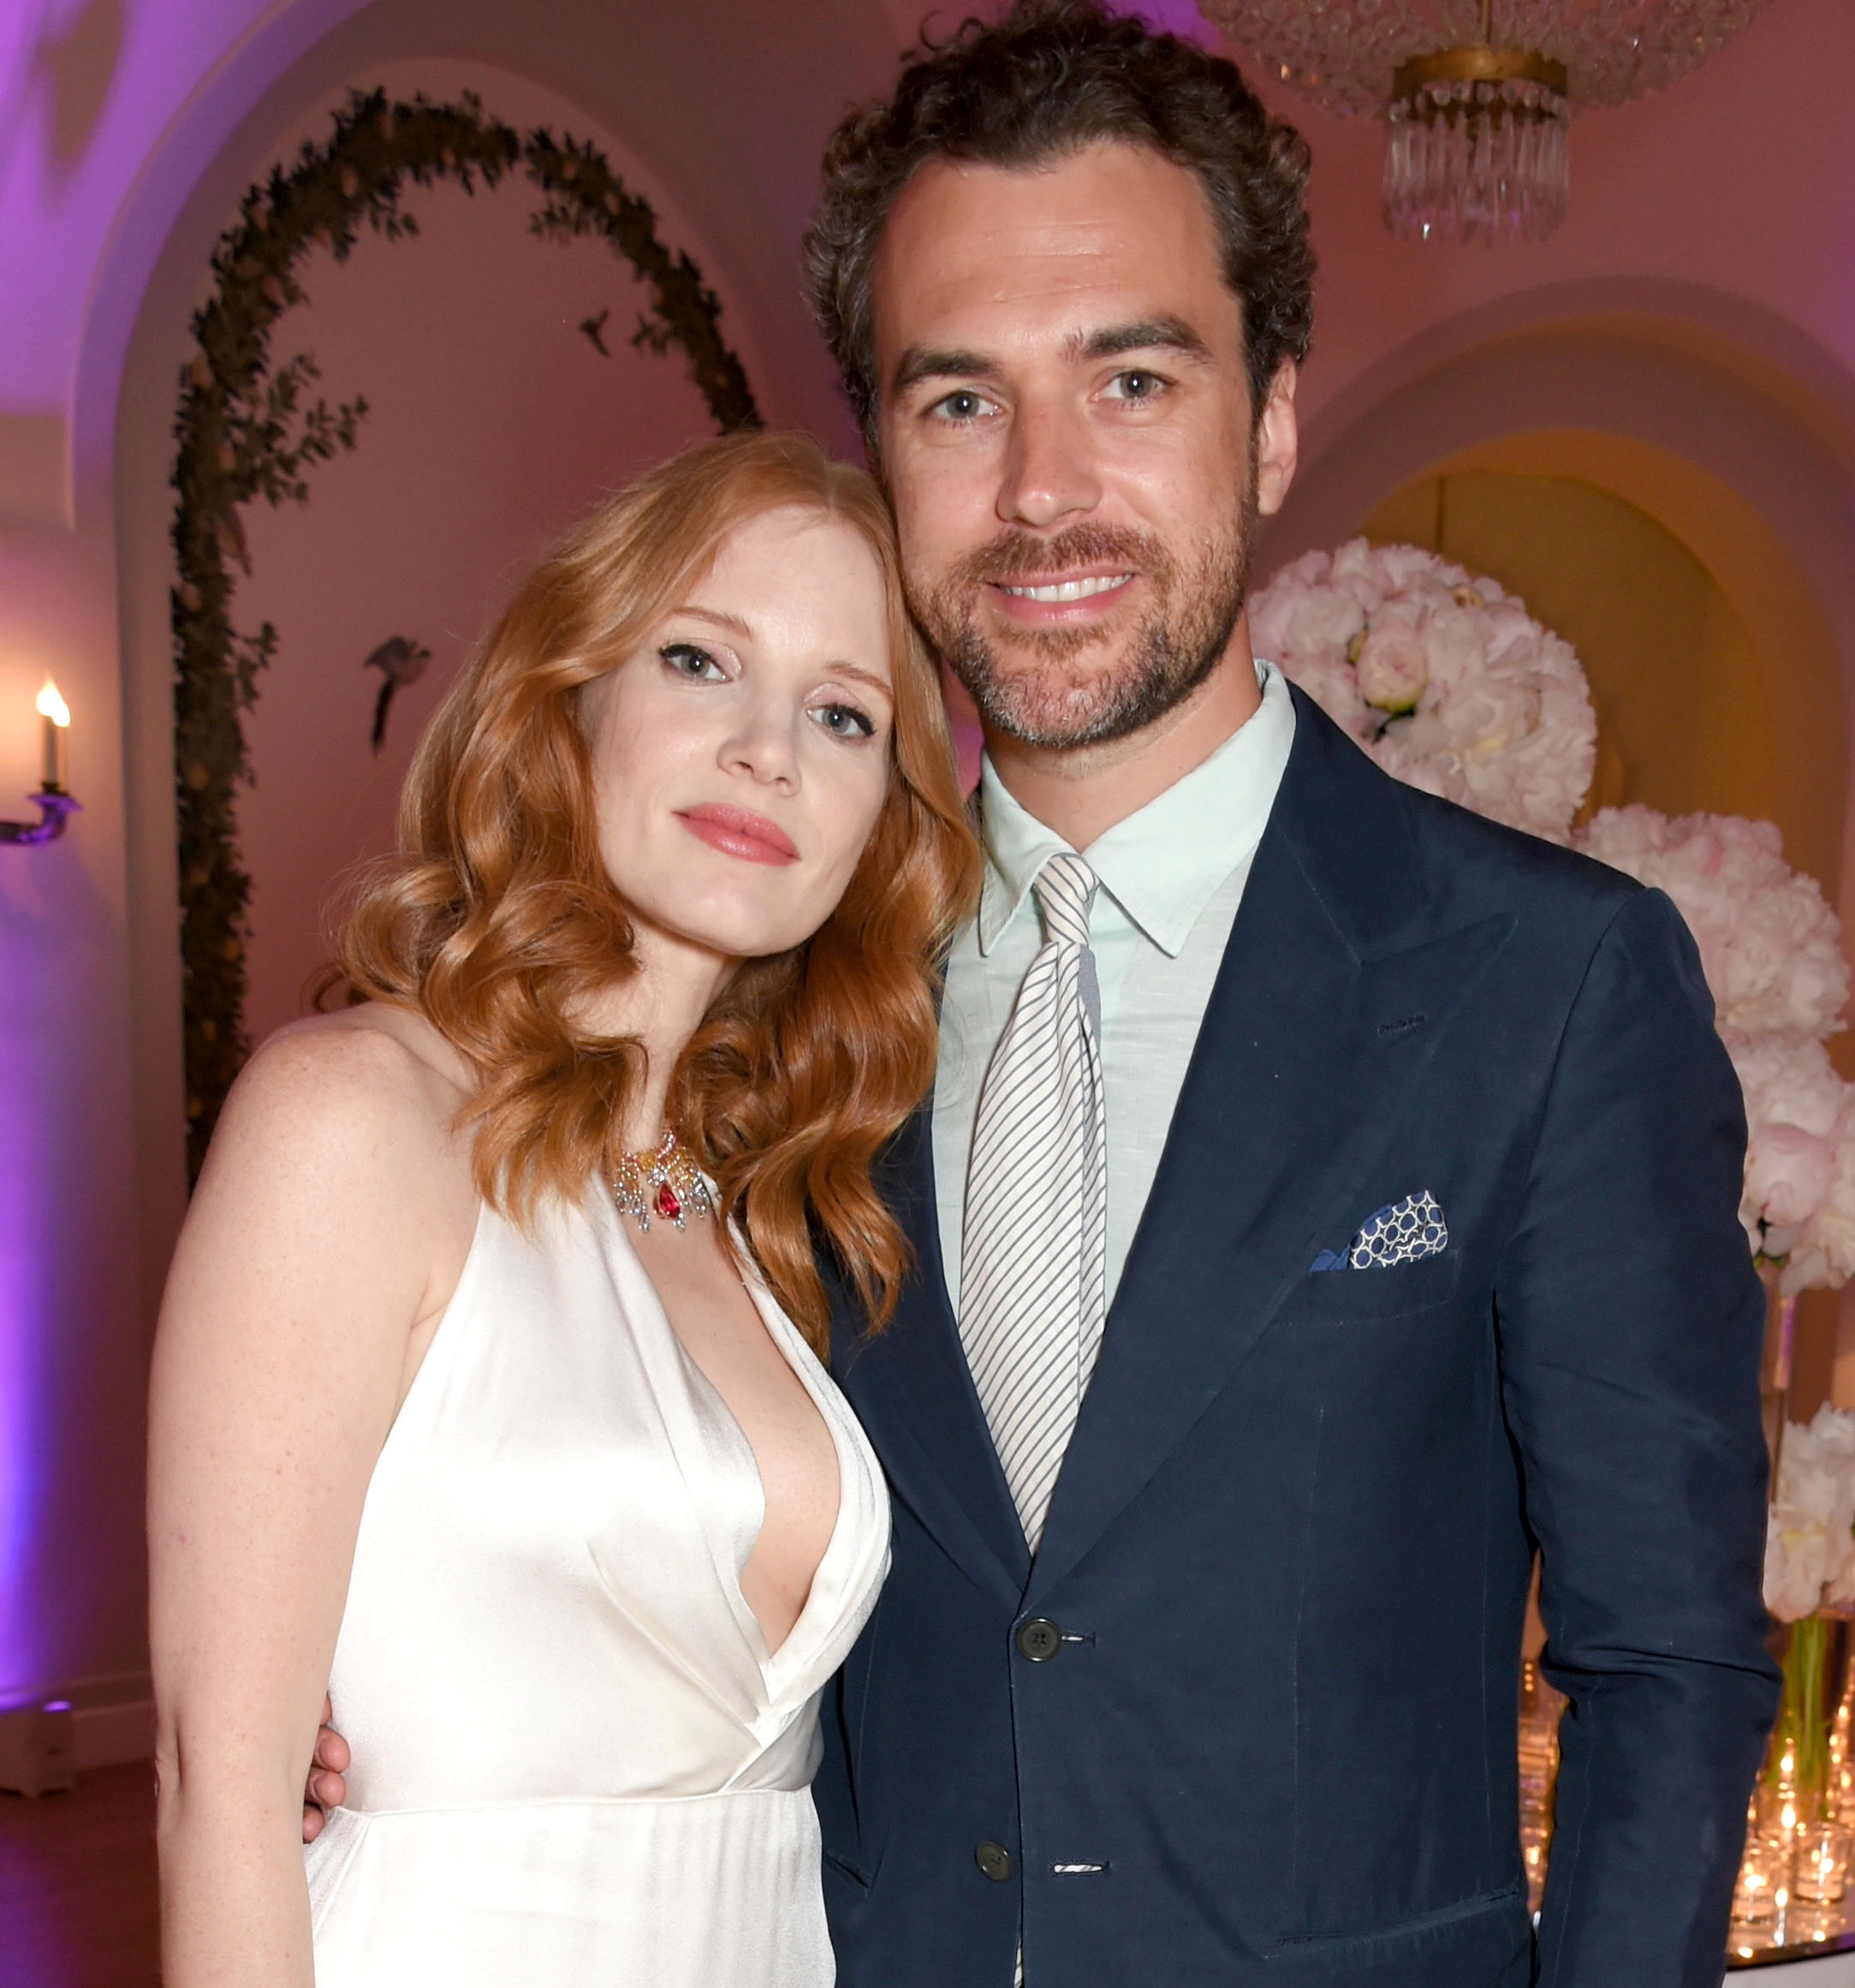 Jessica Chastain and Gian Luca Passi de Preposulo pose for a photo at a Vanity Fair and HBO Dinner